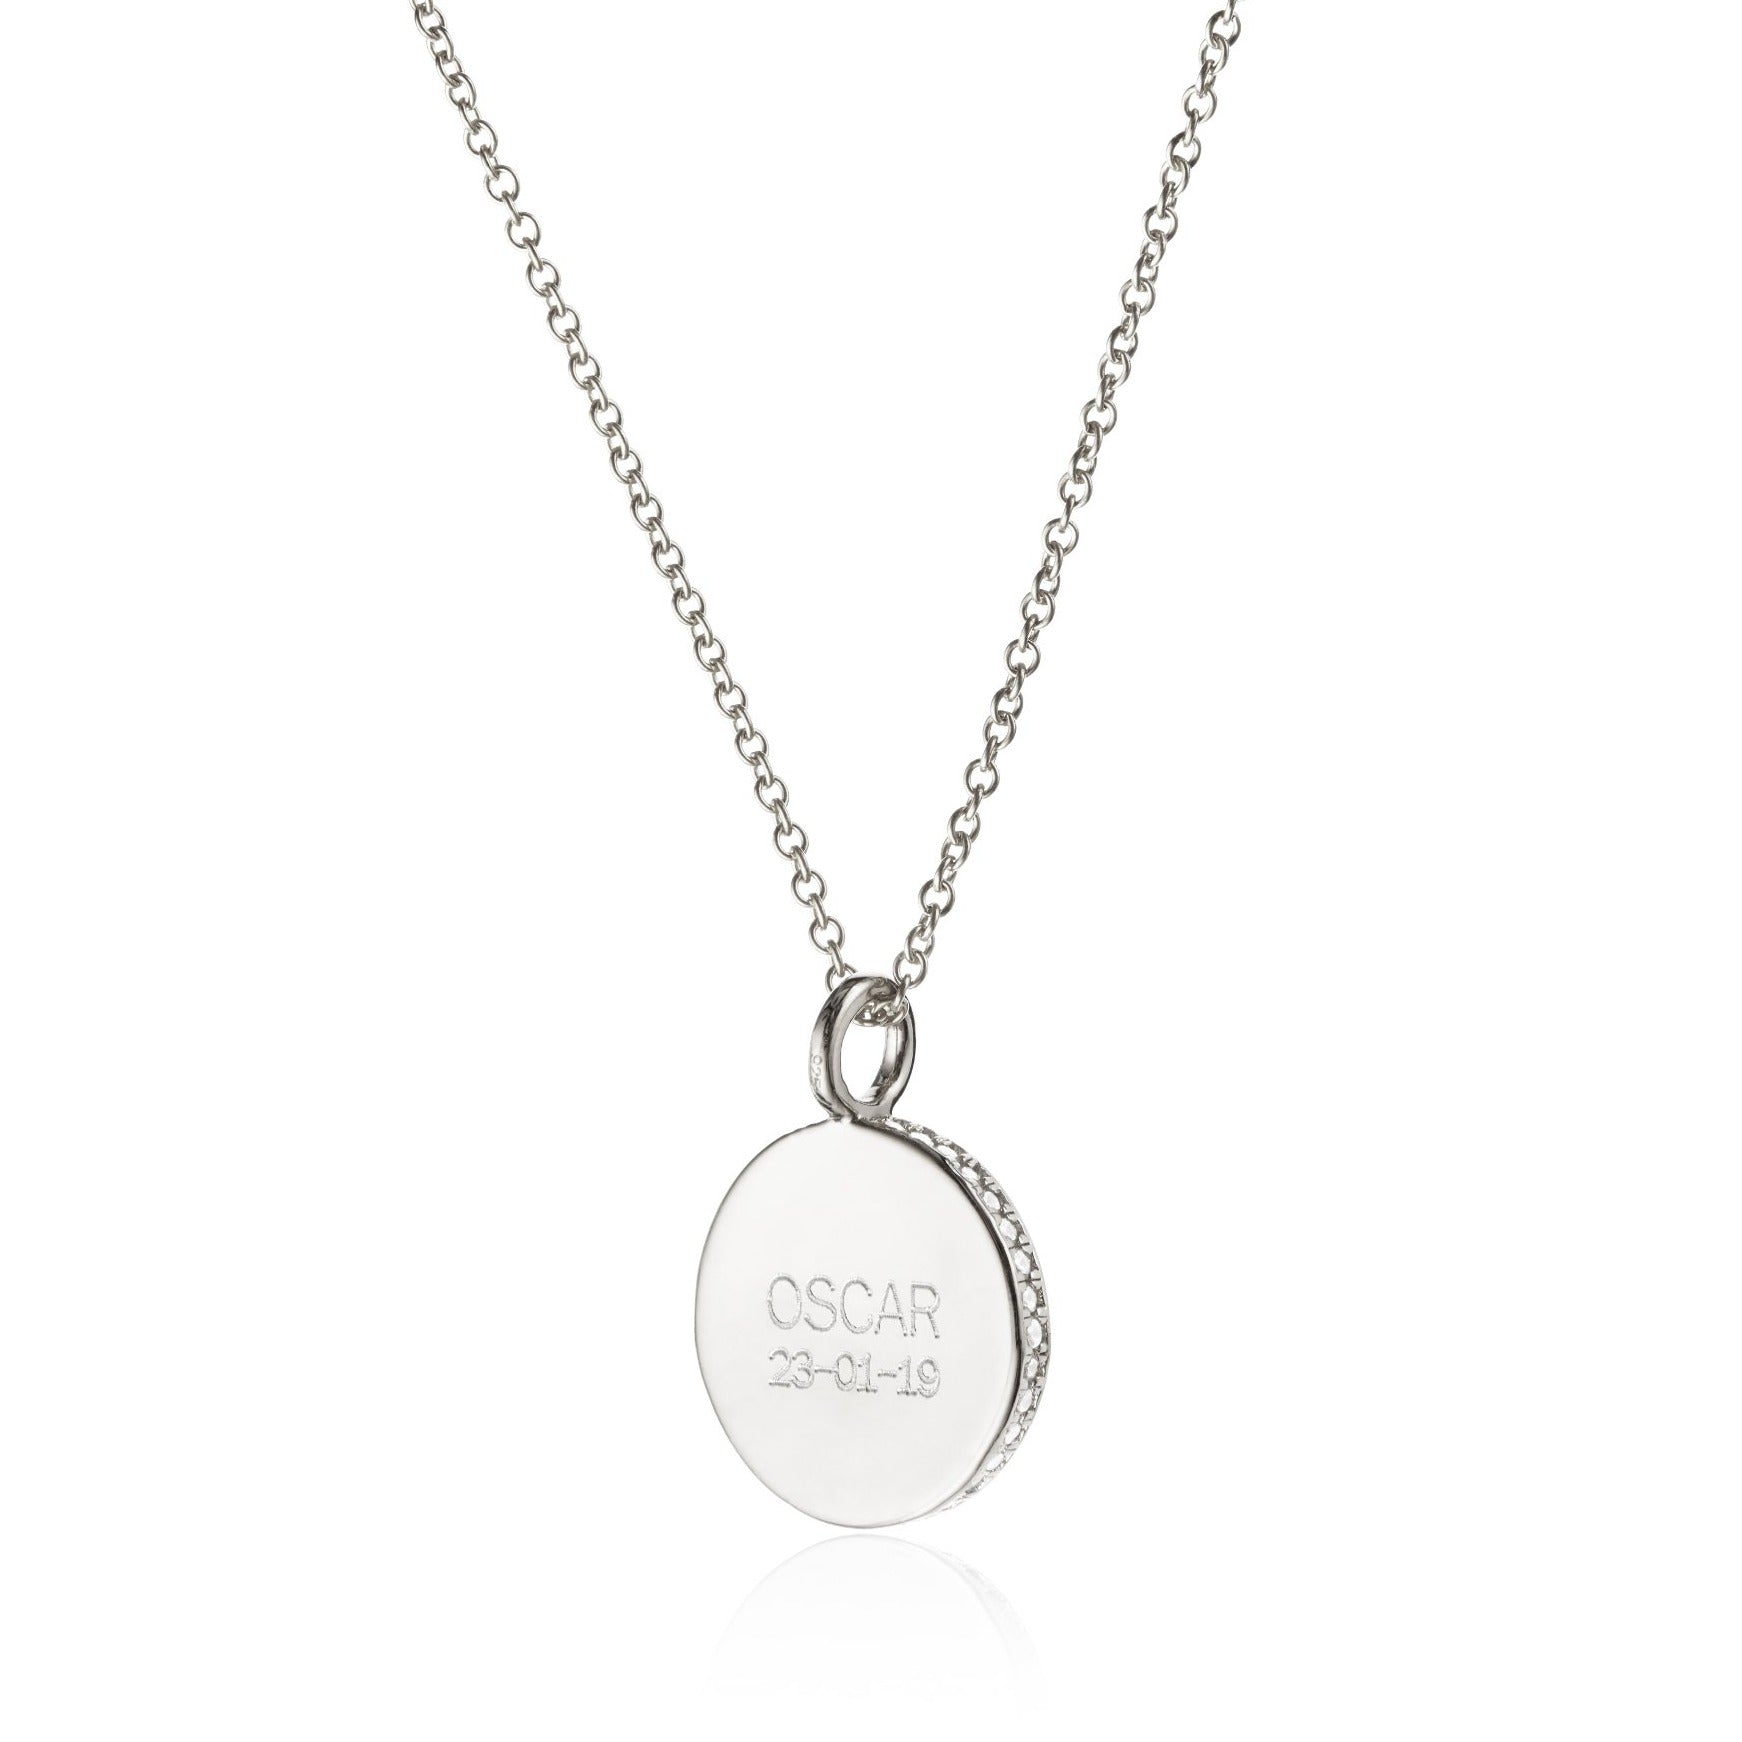 Silver small diamond style disc necklace with the name OSCAR engraved on a white background